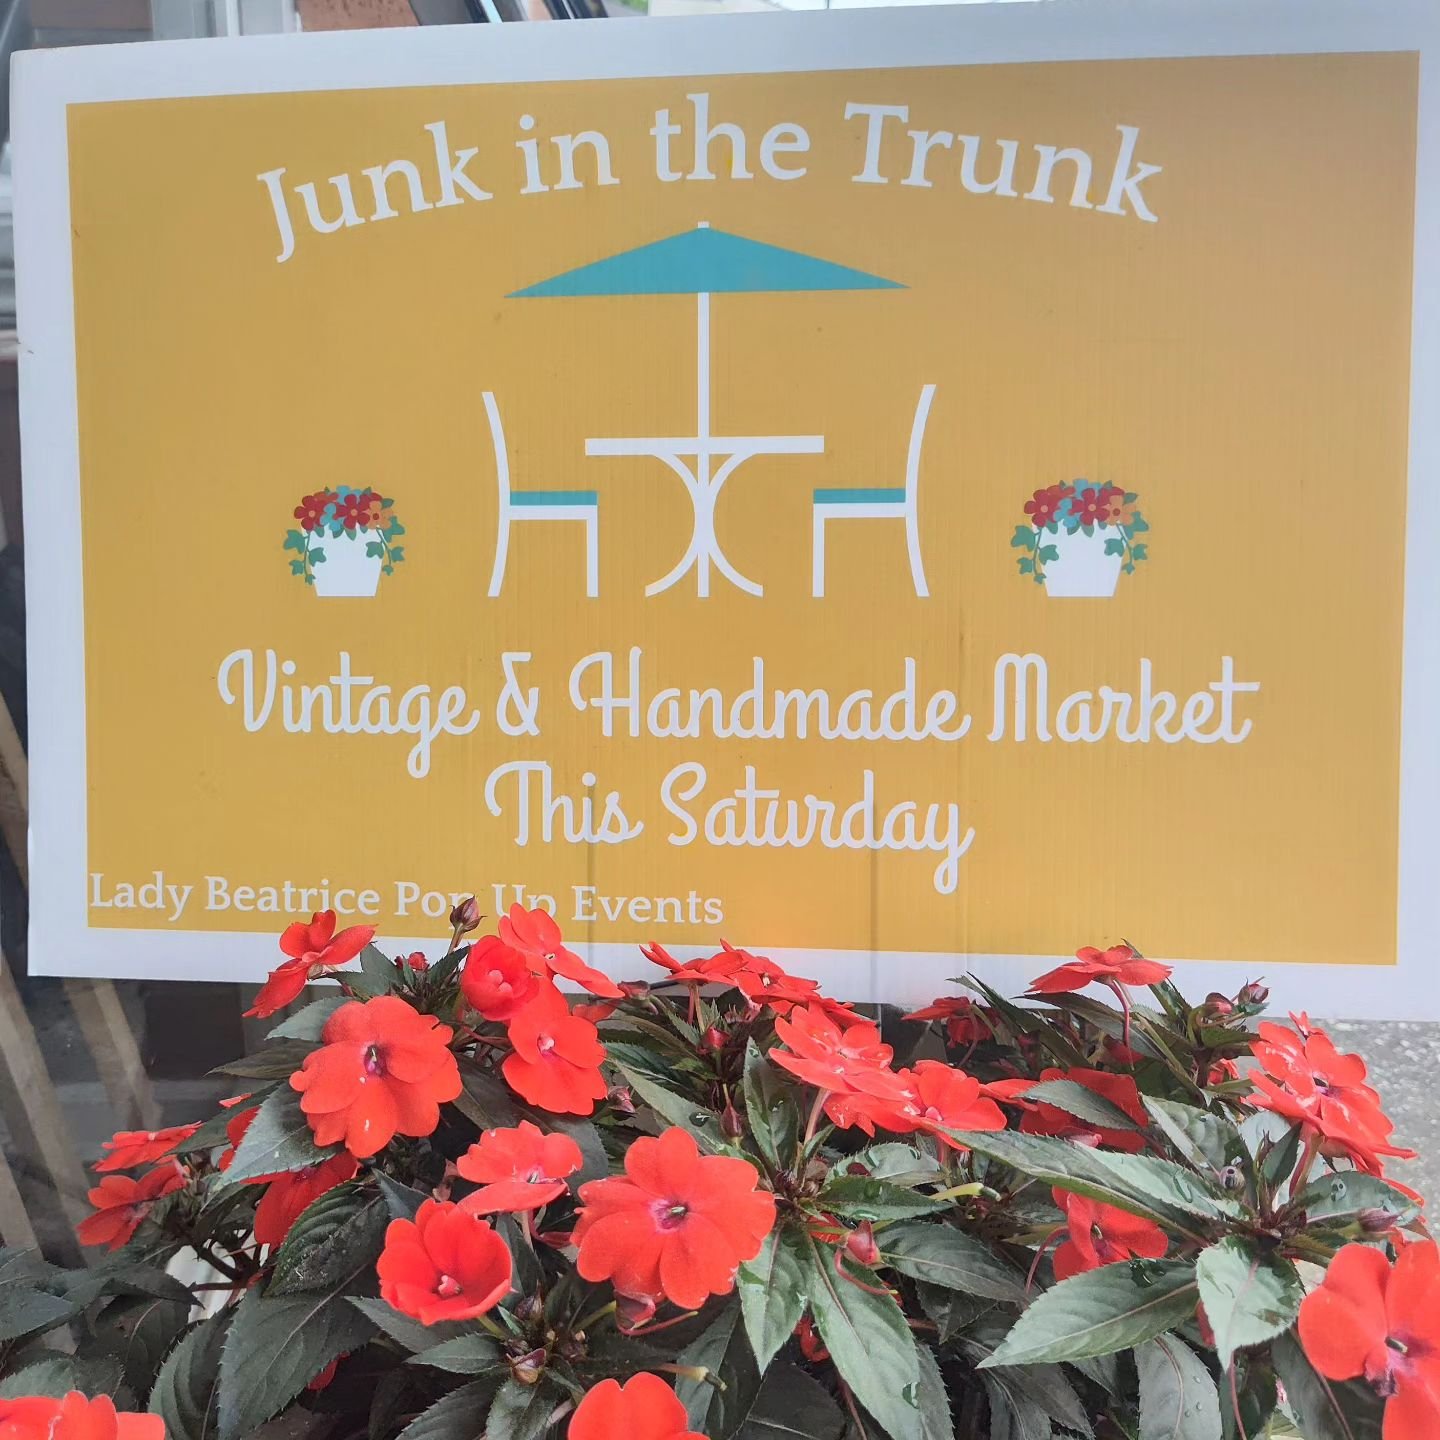 This Saturday May 18,  10-5 the Junk In The Trunk Outdoor Market will be at The Garage on 25!! Over 35+ vendors with great Vintage, Handmade , Local artists!
This is a rain or shine event. We'll also have Shelter Dog Transport Alliance here and Birdy